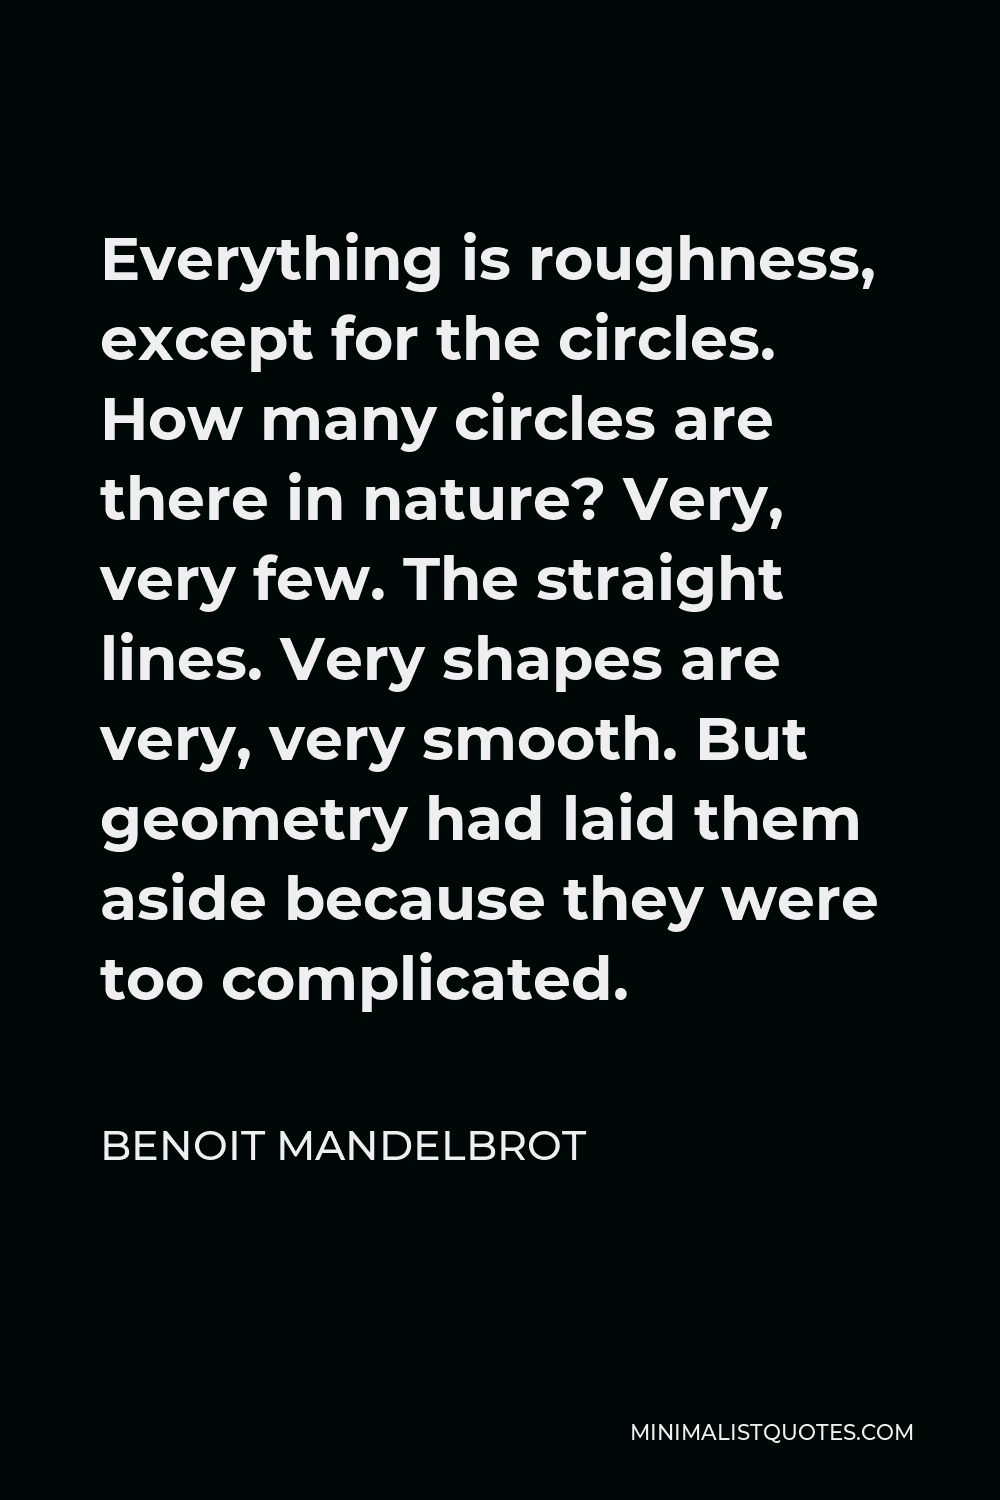 Benoit Mandelbrot Quote - Everything is roughness, except for the circles. How many circles are there in nature? Very, very few. The straight lines. Very shapes are very, very smooth. But geometry had laid them aside because they were too complicated.